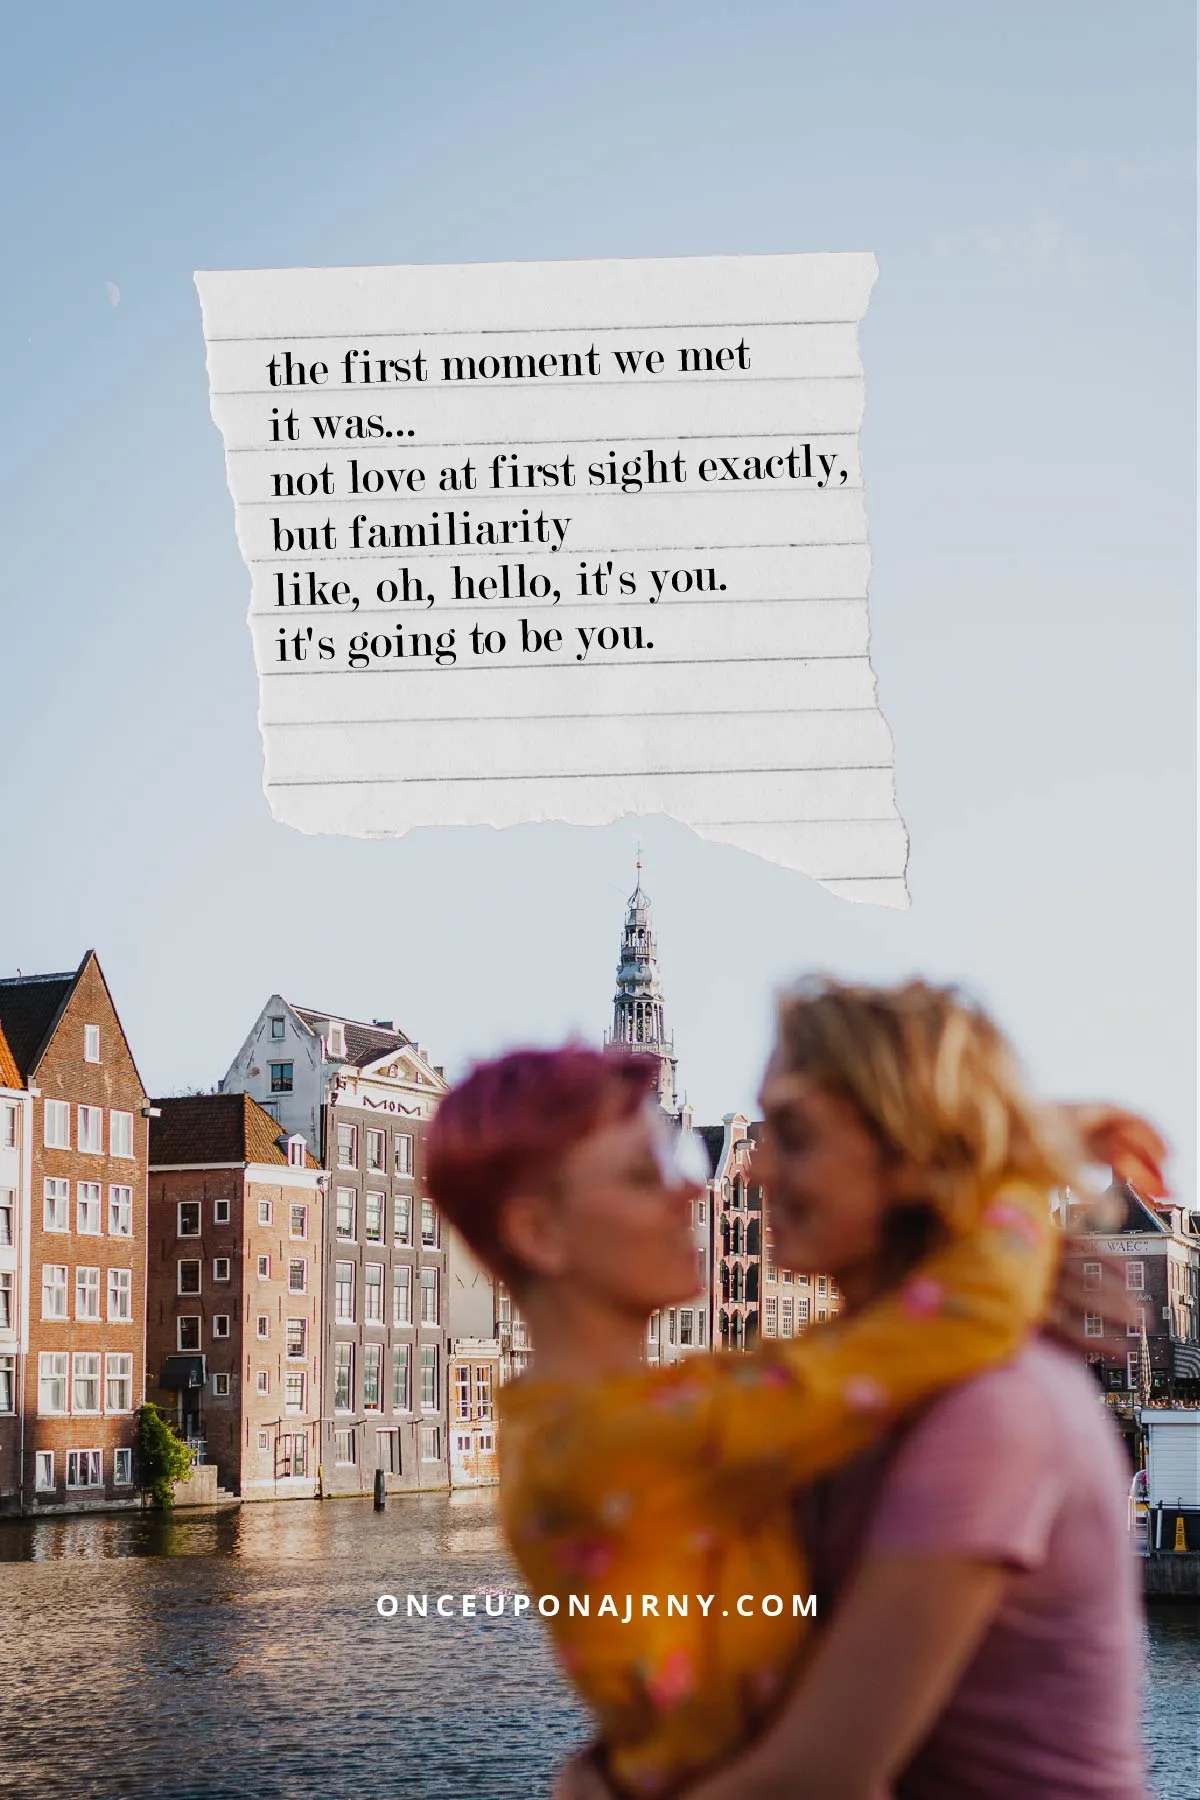 The first moment we met. It was... Not love at first sight exactly, but familiarity. Like oh, hello, it's you. It's going to be you lesbian love quotes